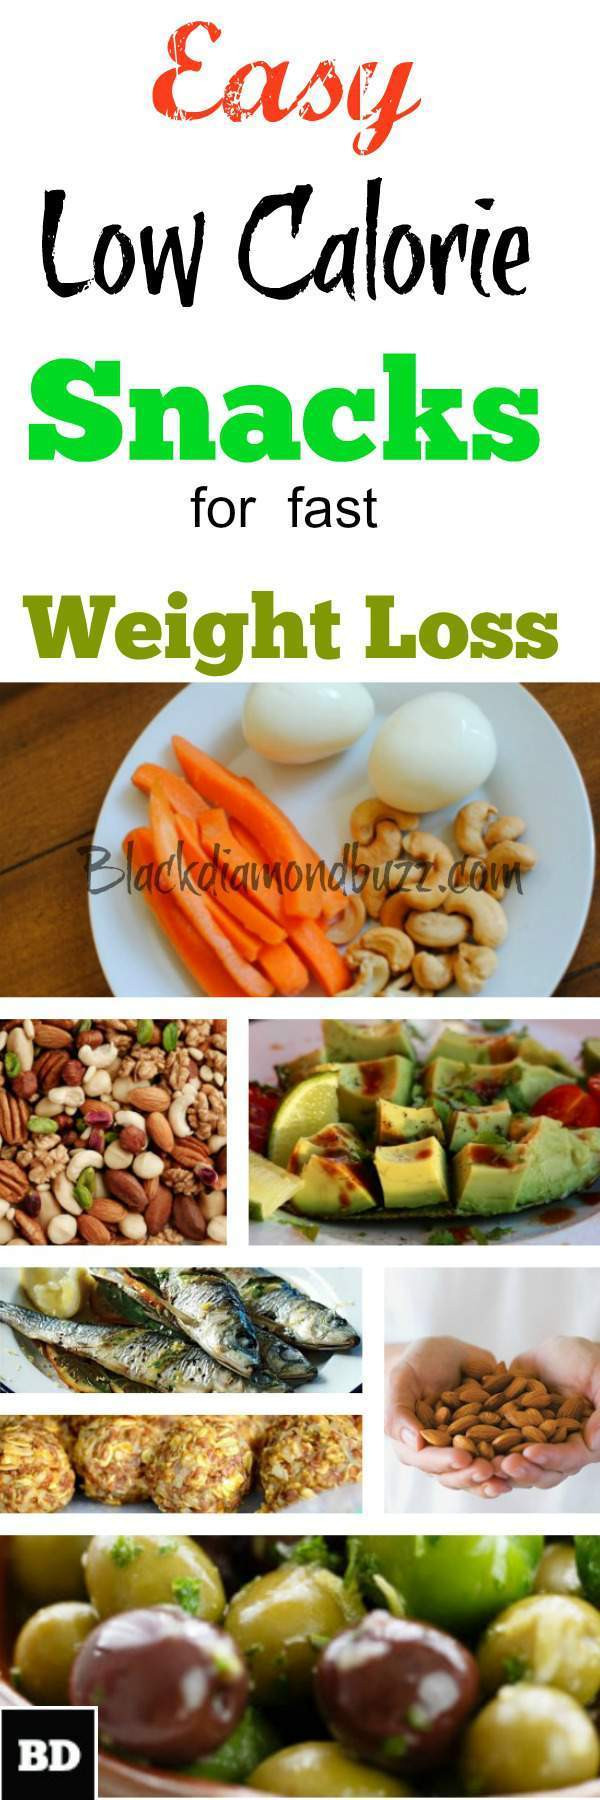 Healthy Low Calorie Snacks
 10 Best Easy Healthy Low Calorie Snacks for Weight Loss